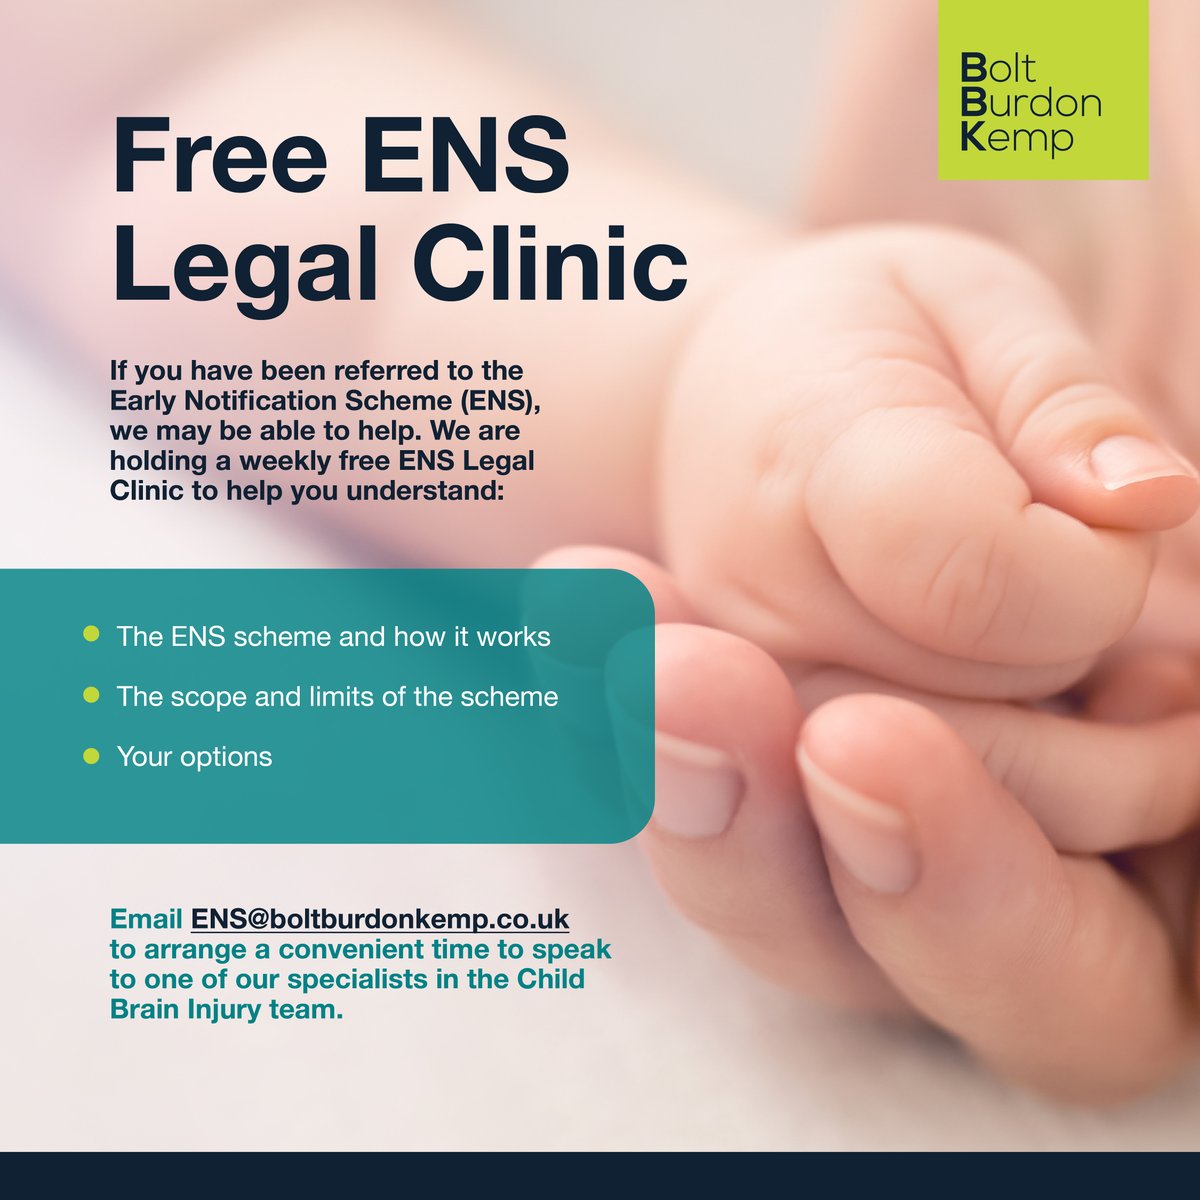 If you've received a letter advising that you've been referred to the Early Notification Scheme (ENS), book a place on our dedicated ENS Clinic where one of our Child Brain Injury experts will explain how the scheme works and your options. Contact us on ENS@boltburdonkemp.co.uk